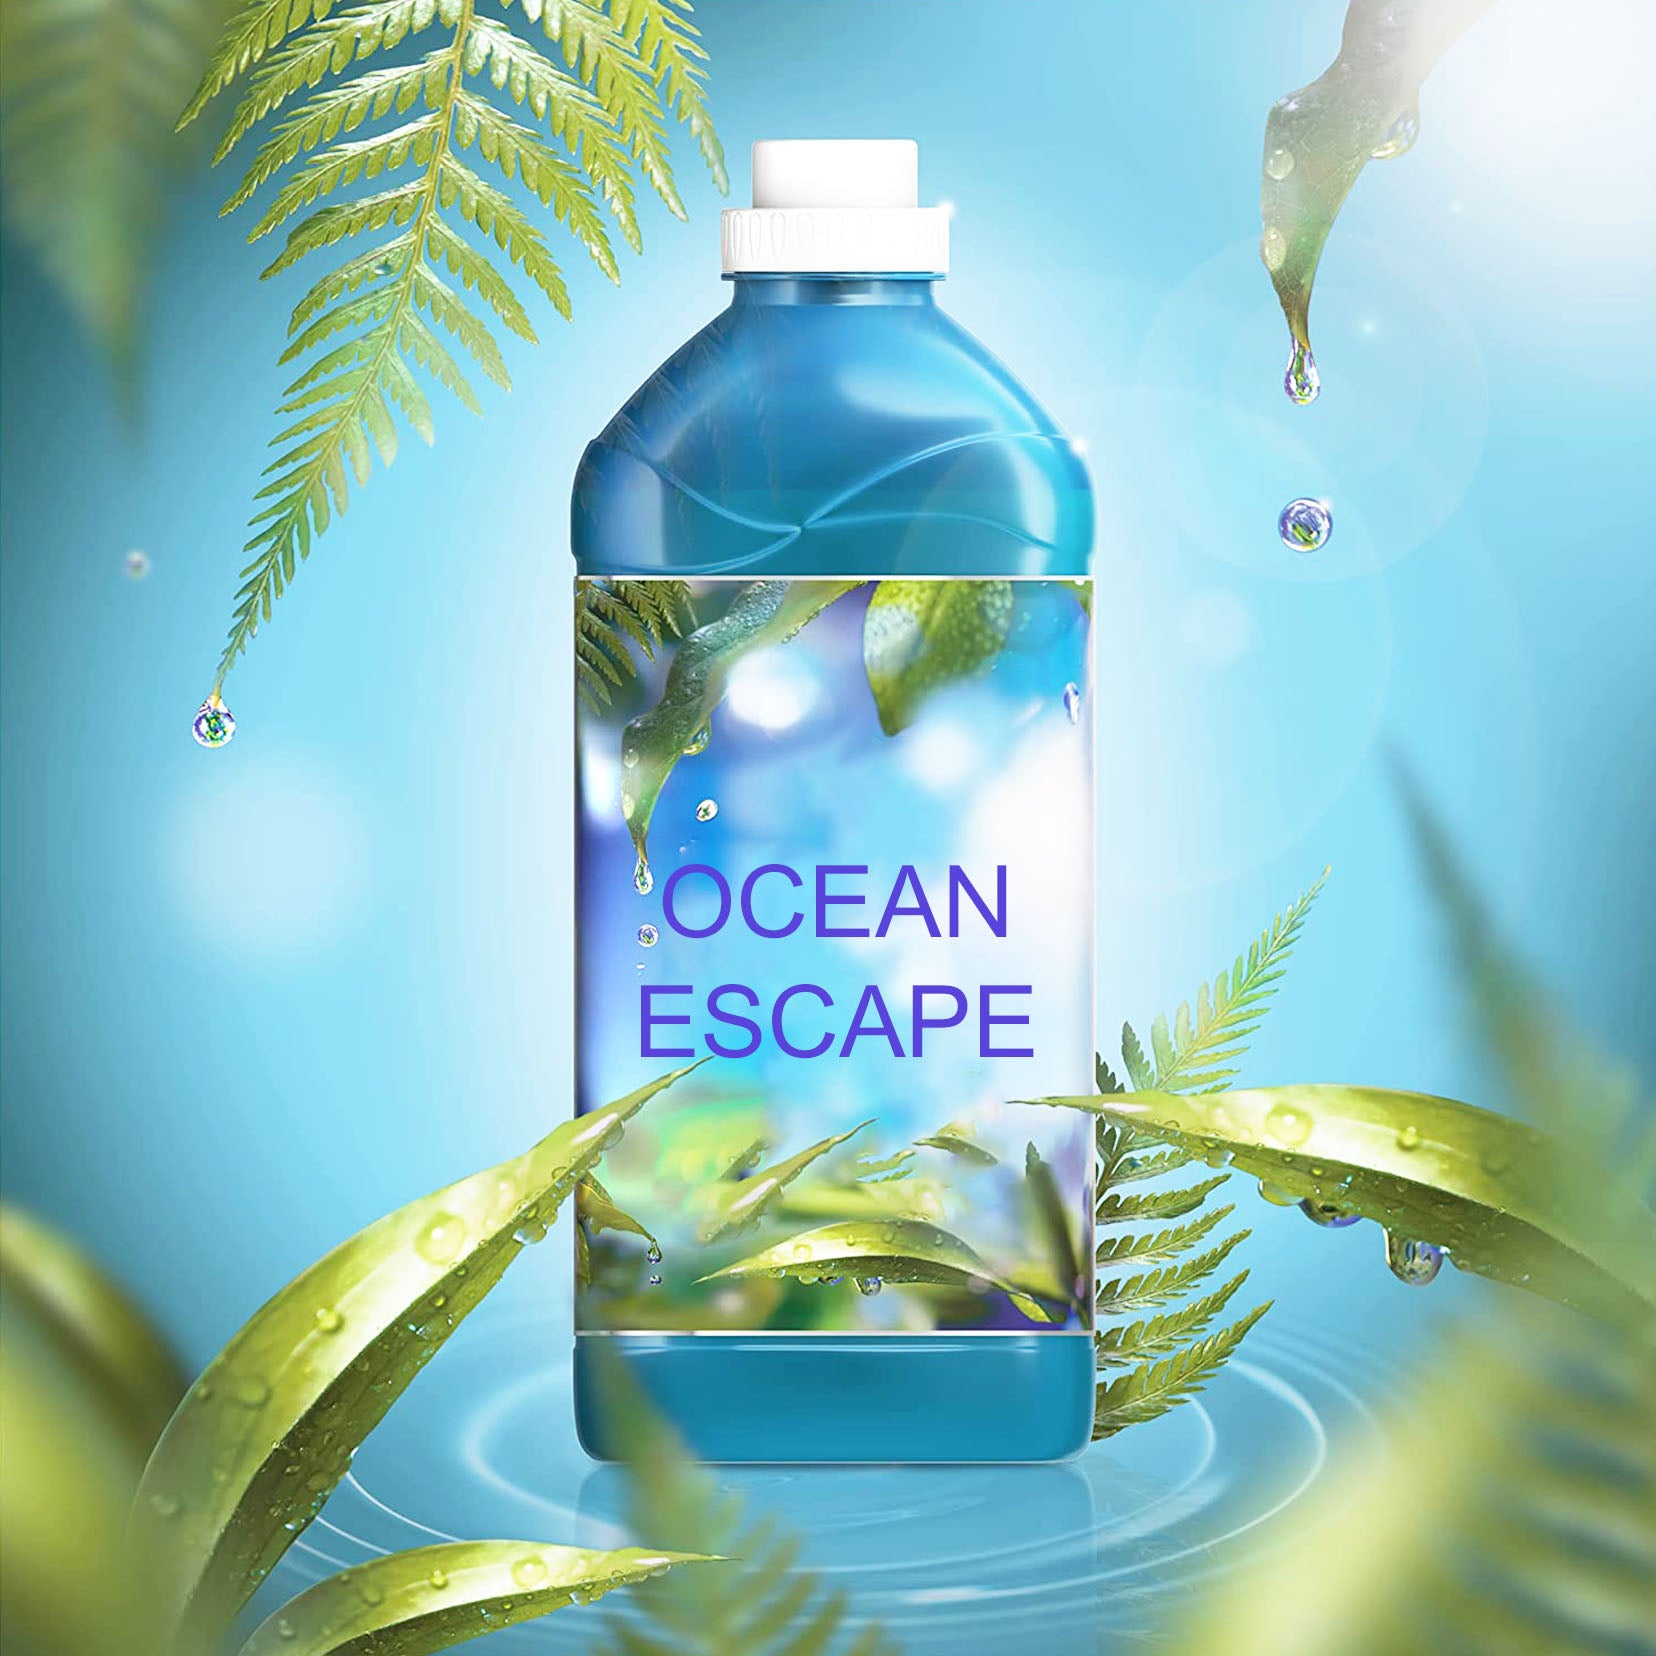 Ocean Escape Fragrance Oil | Truly Personal | Candles, Wax Melts, Soap, Bath Bombs